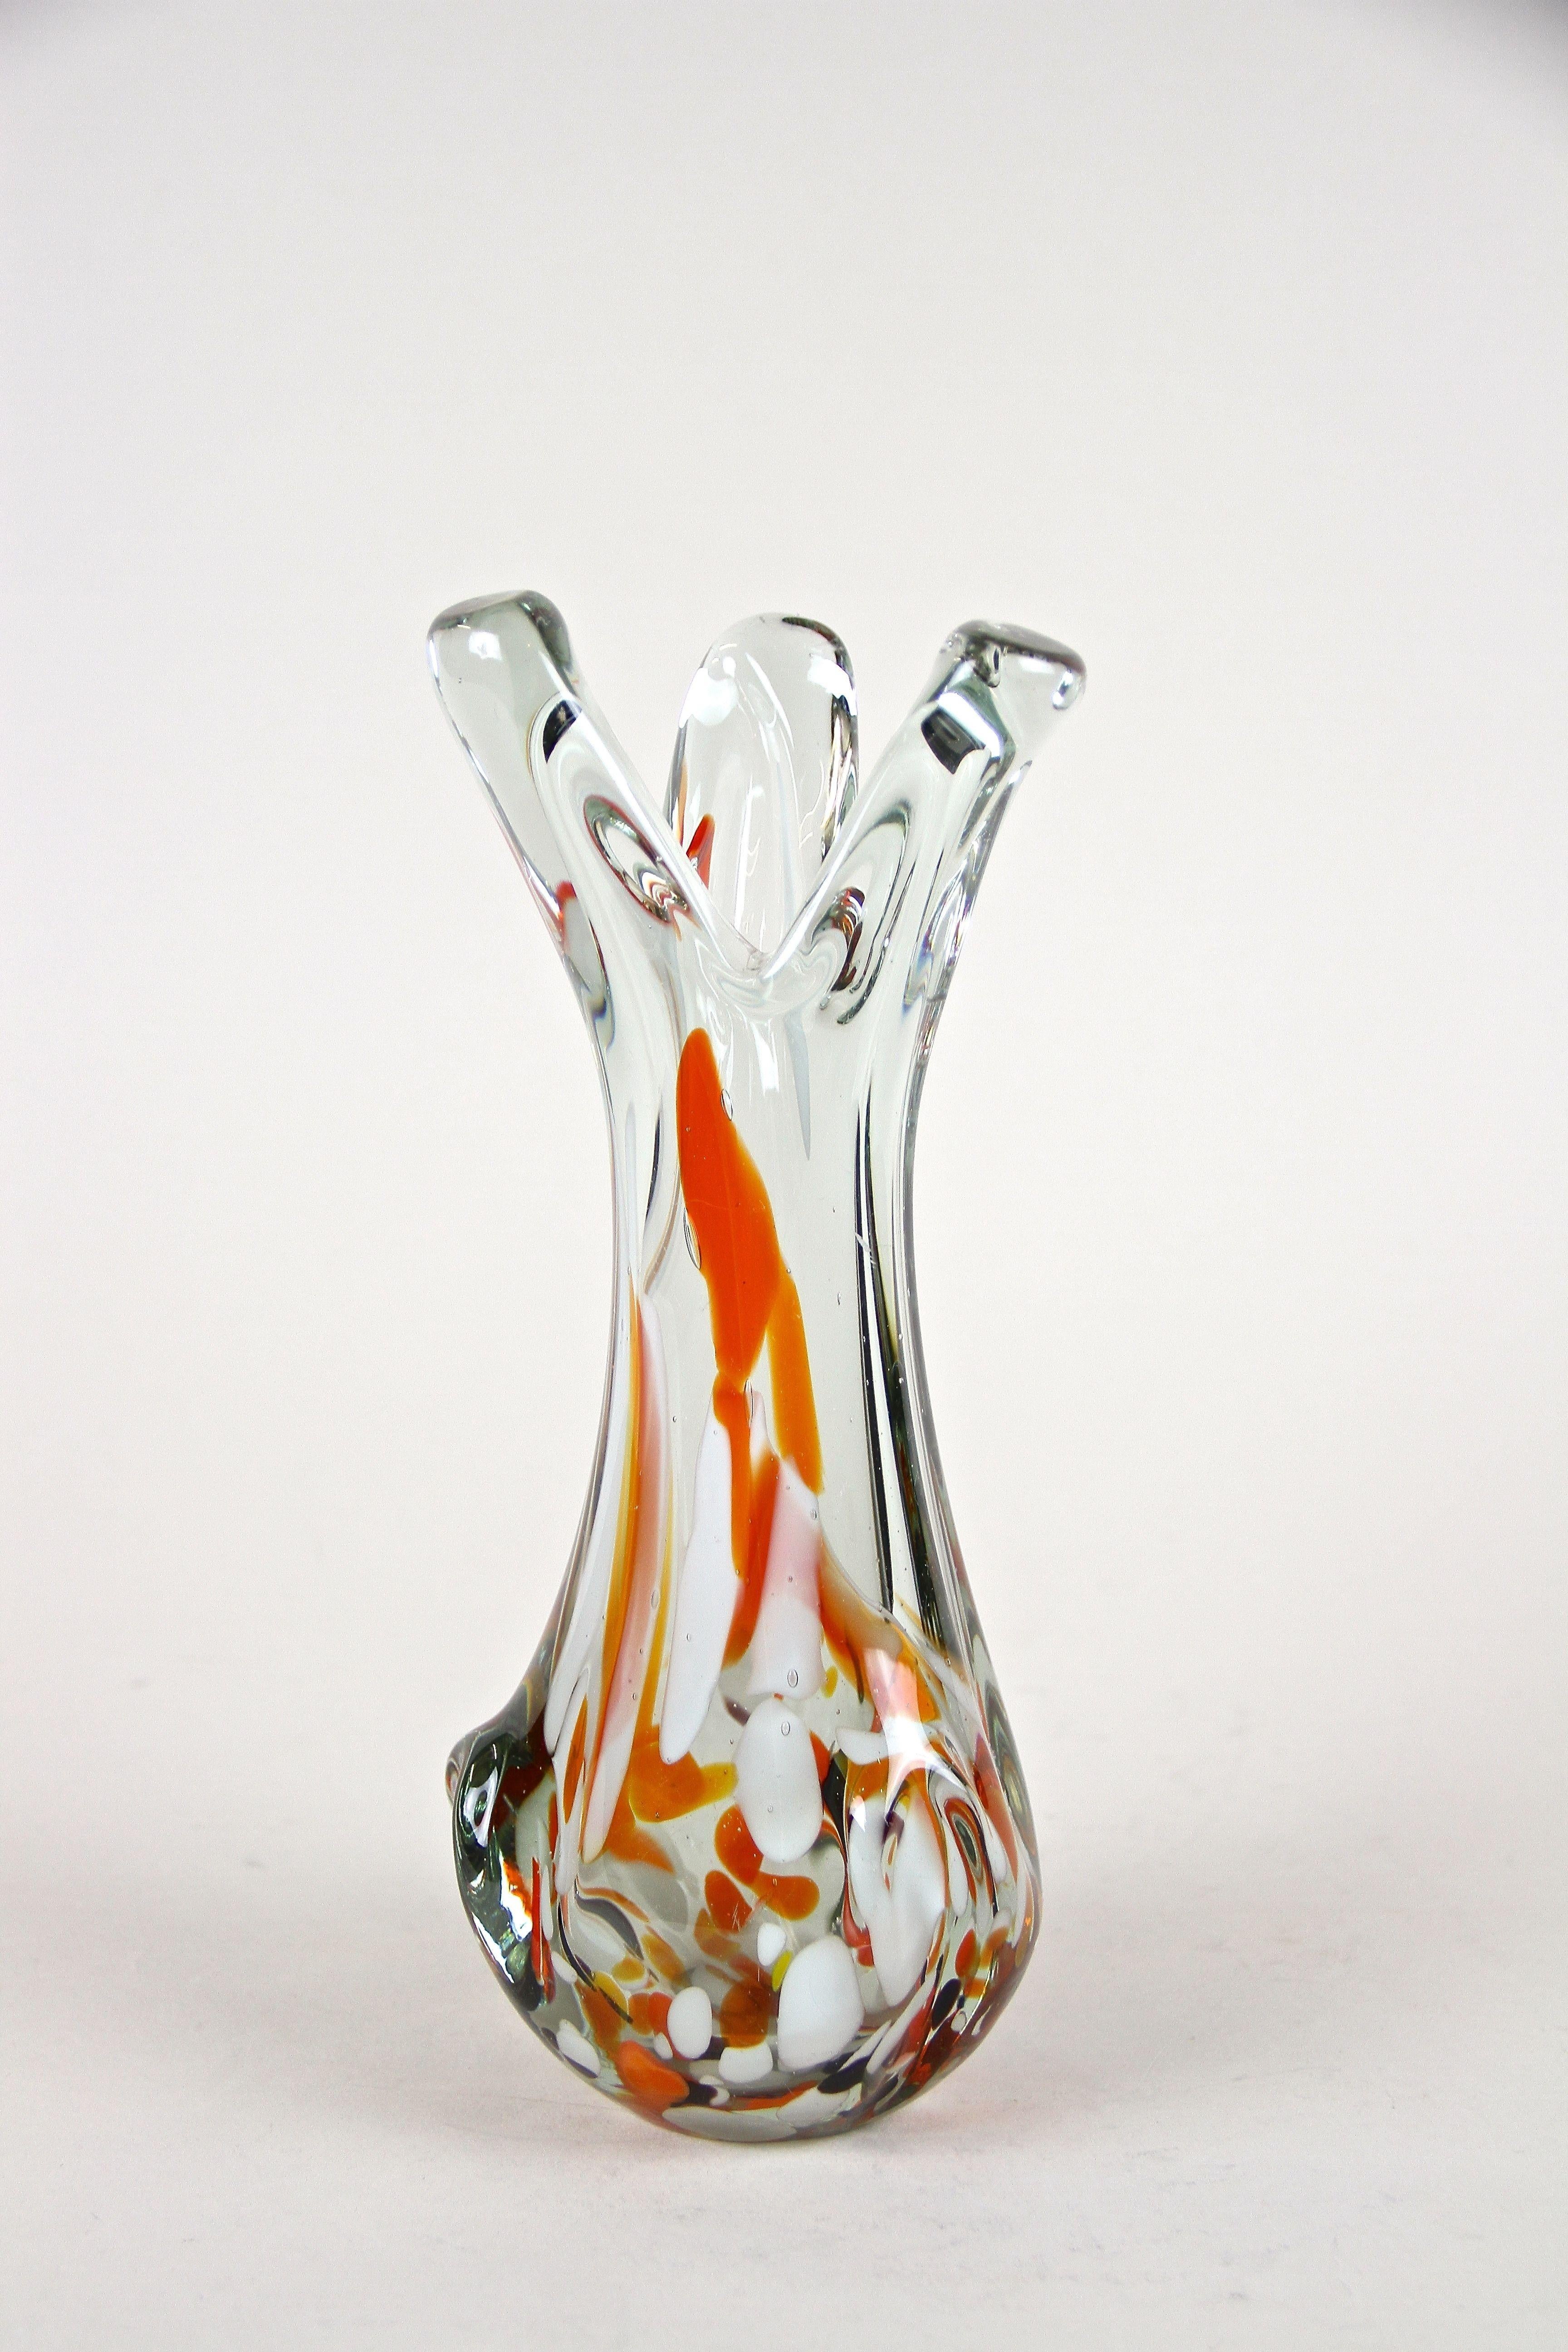 Lovely, unusual Murano glass vase made in the 1970s in Italy. The very decorative, clear glass vase comes with a beautiful shaped body showing fantastic looking melted spots in red, organge, brown and white tones. An extraordinary glass vase out of